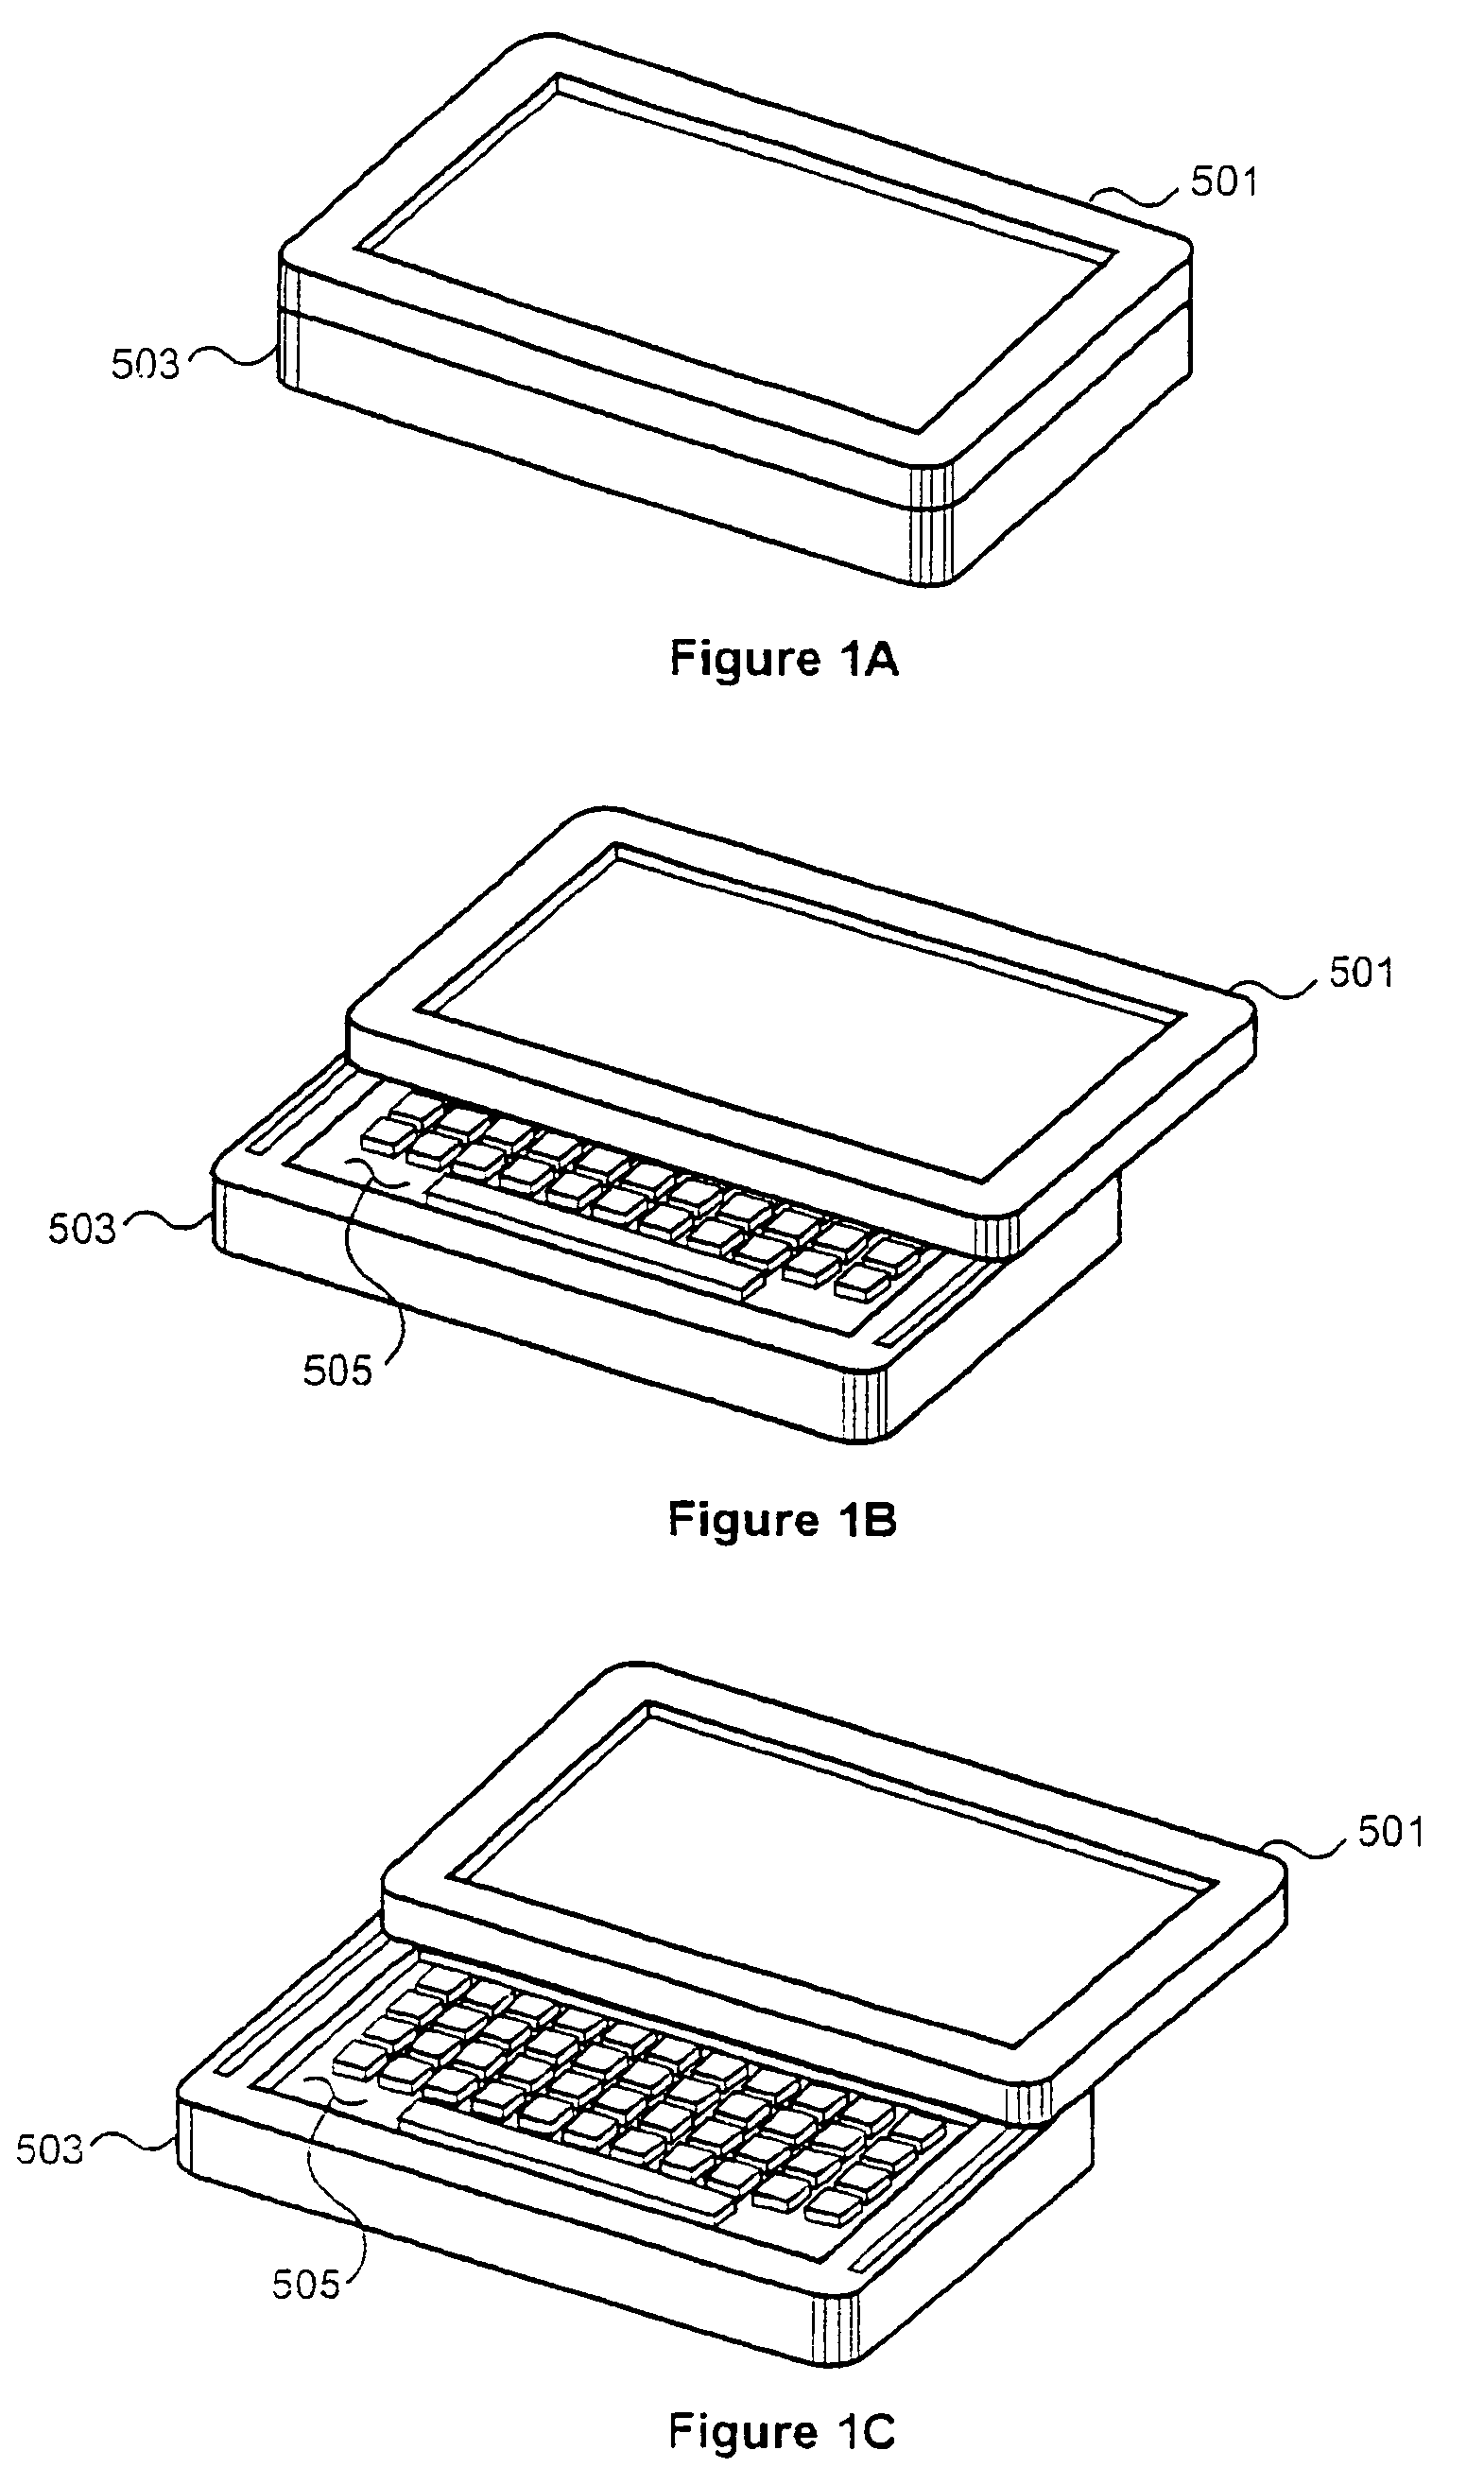 Physical configuration of a hand-held electronic communication device